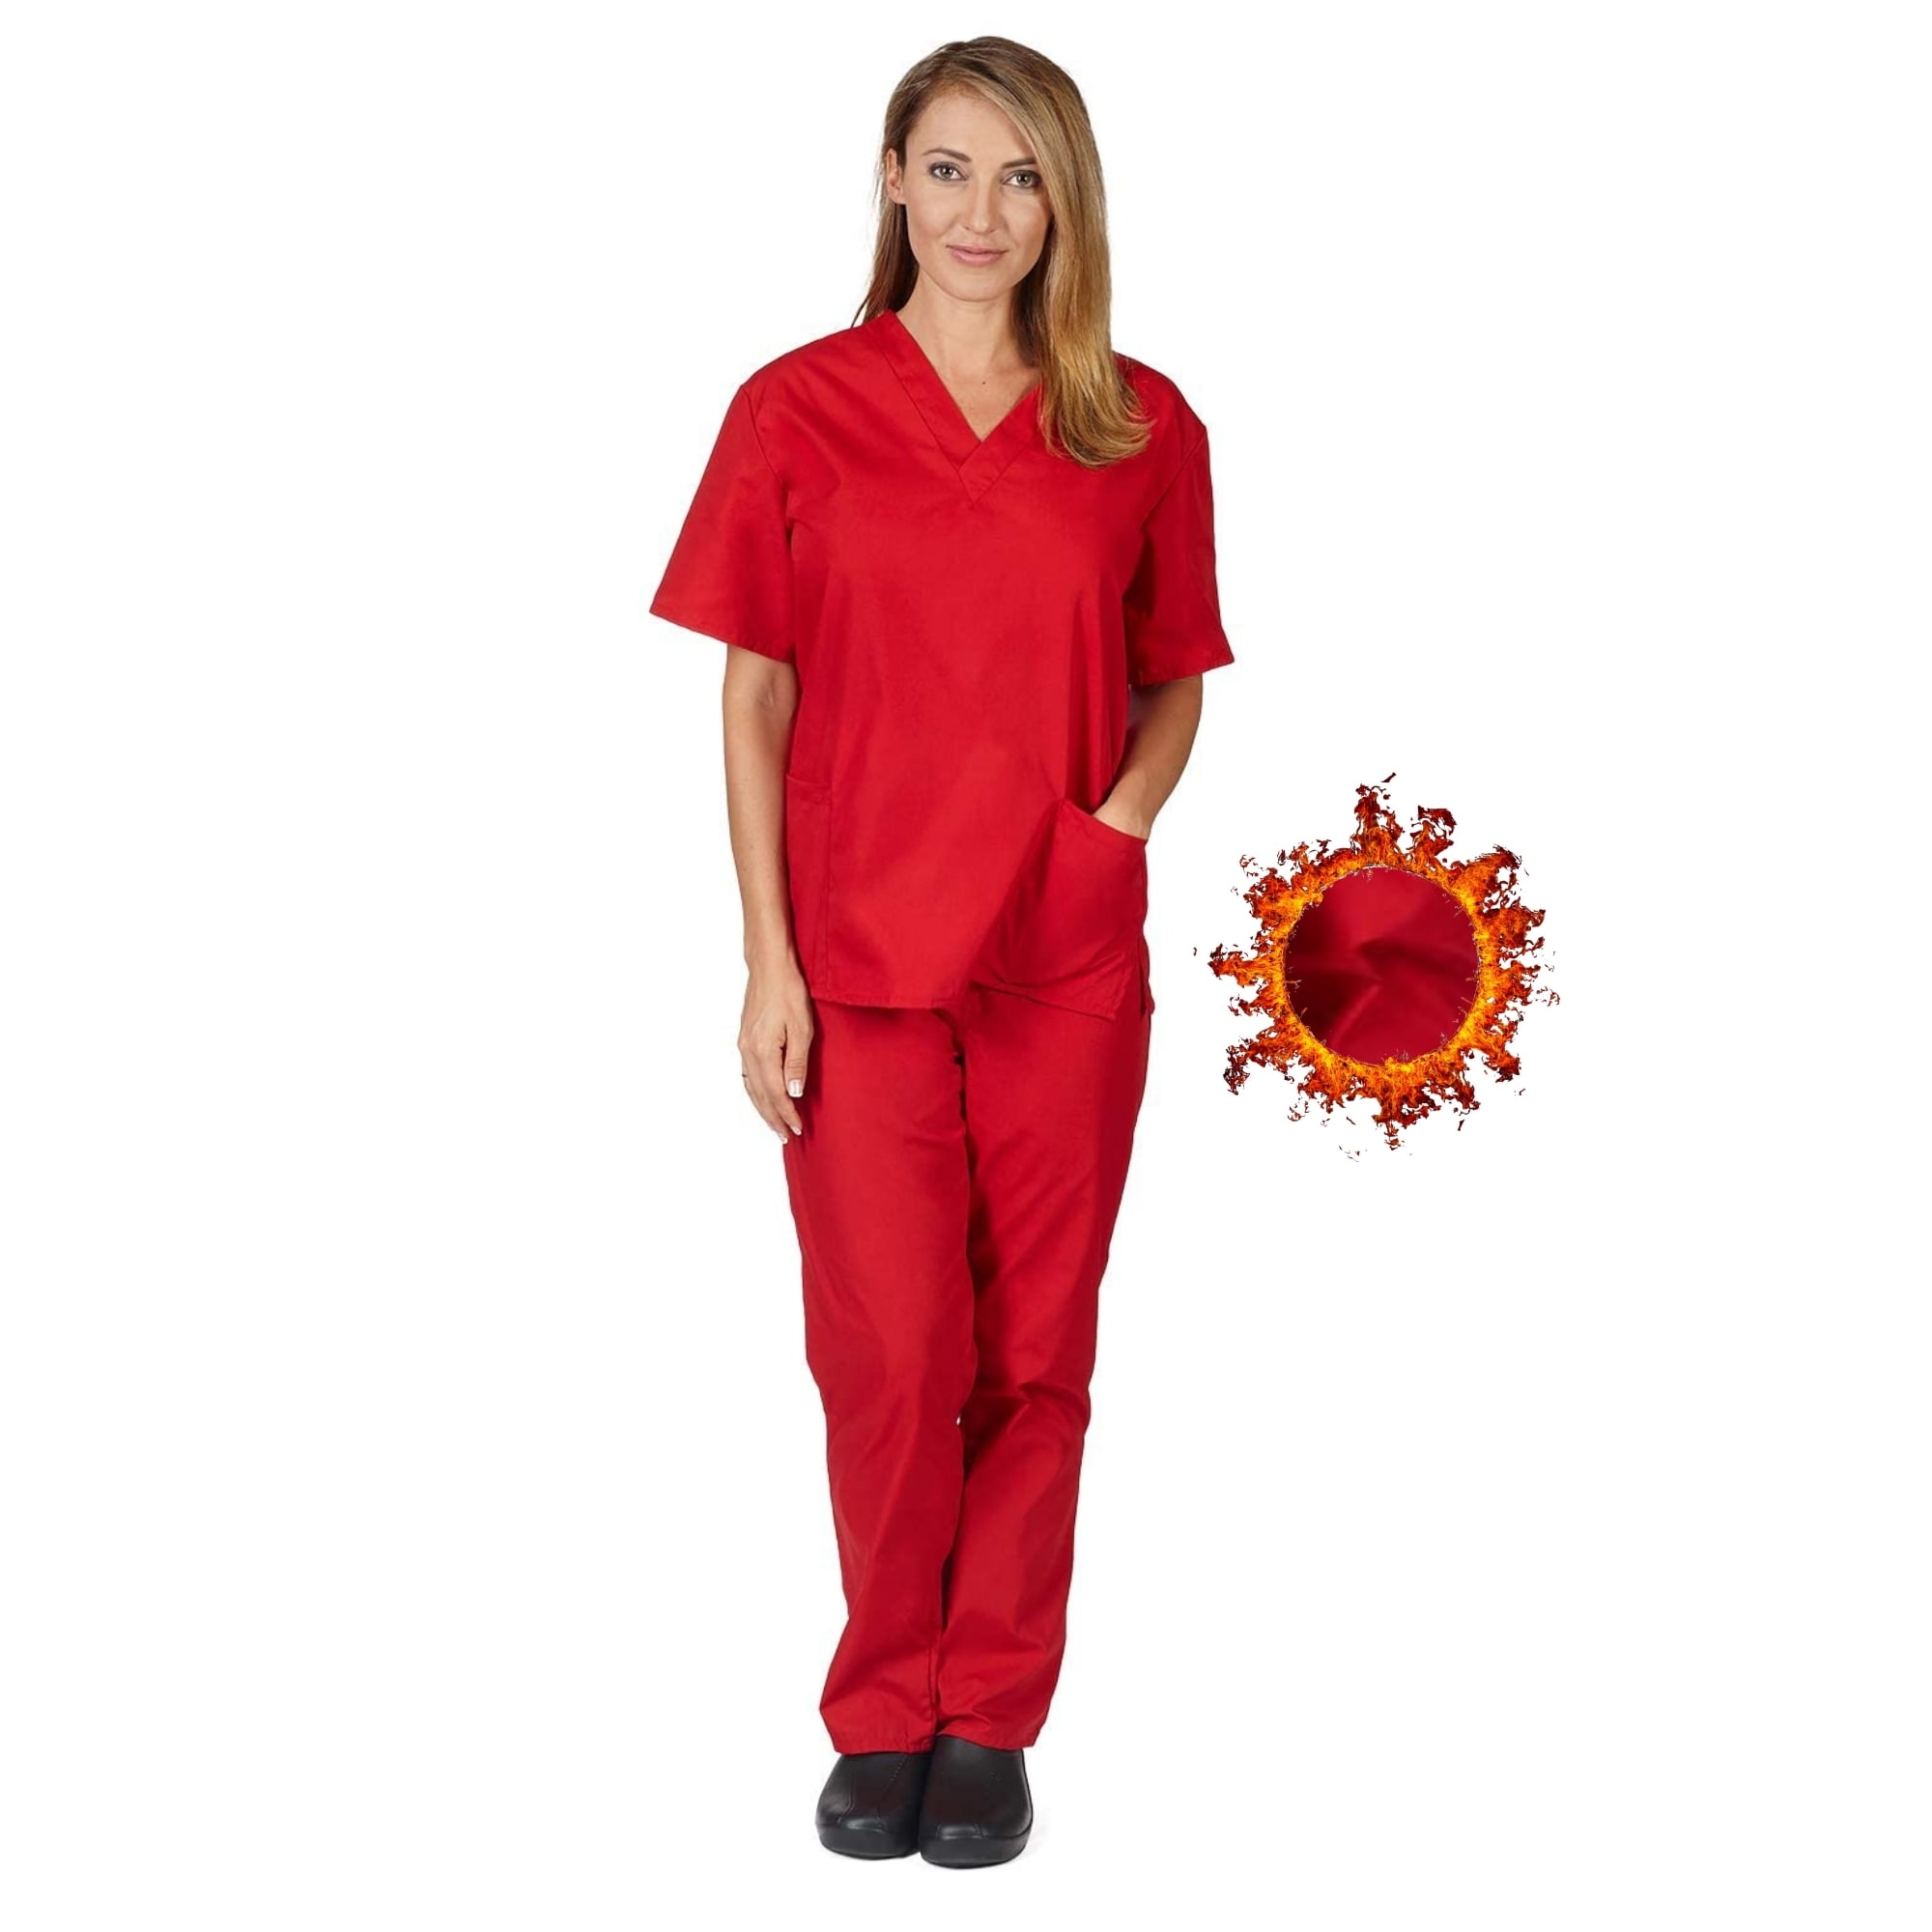 ACTIVE UNIFORMS Unisex Scrub Sets, Scrub Top and Pants. Run Large (Red ...